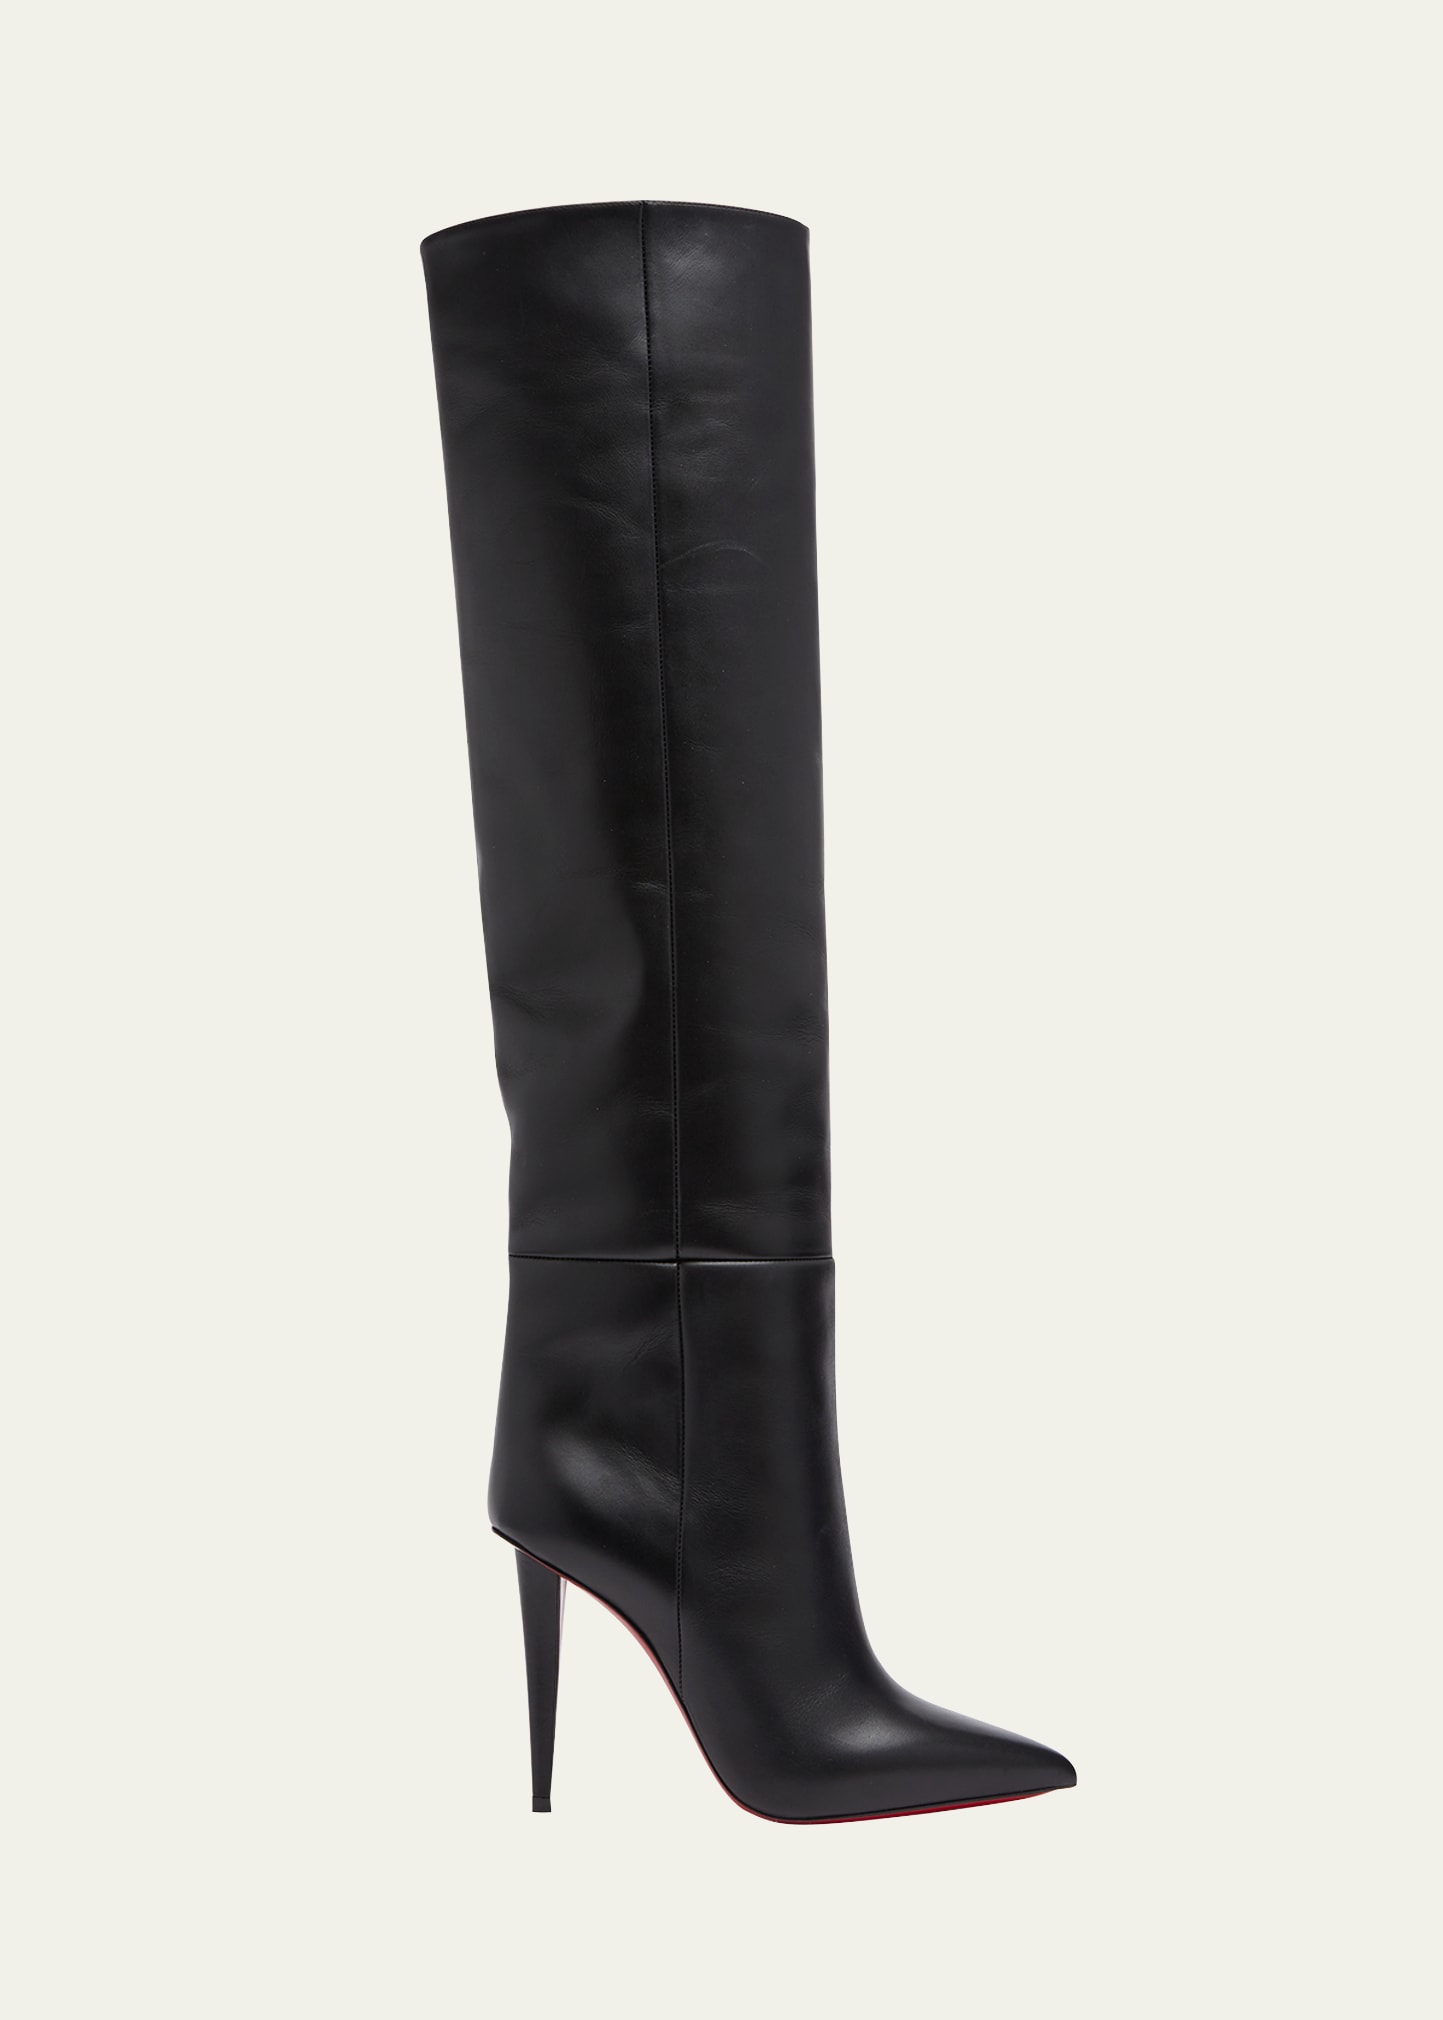 Astrilarge Botta Red Sole Two-Tone Leather Knee-High Boots